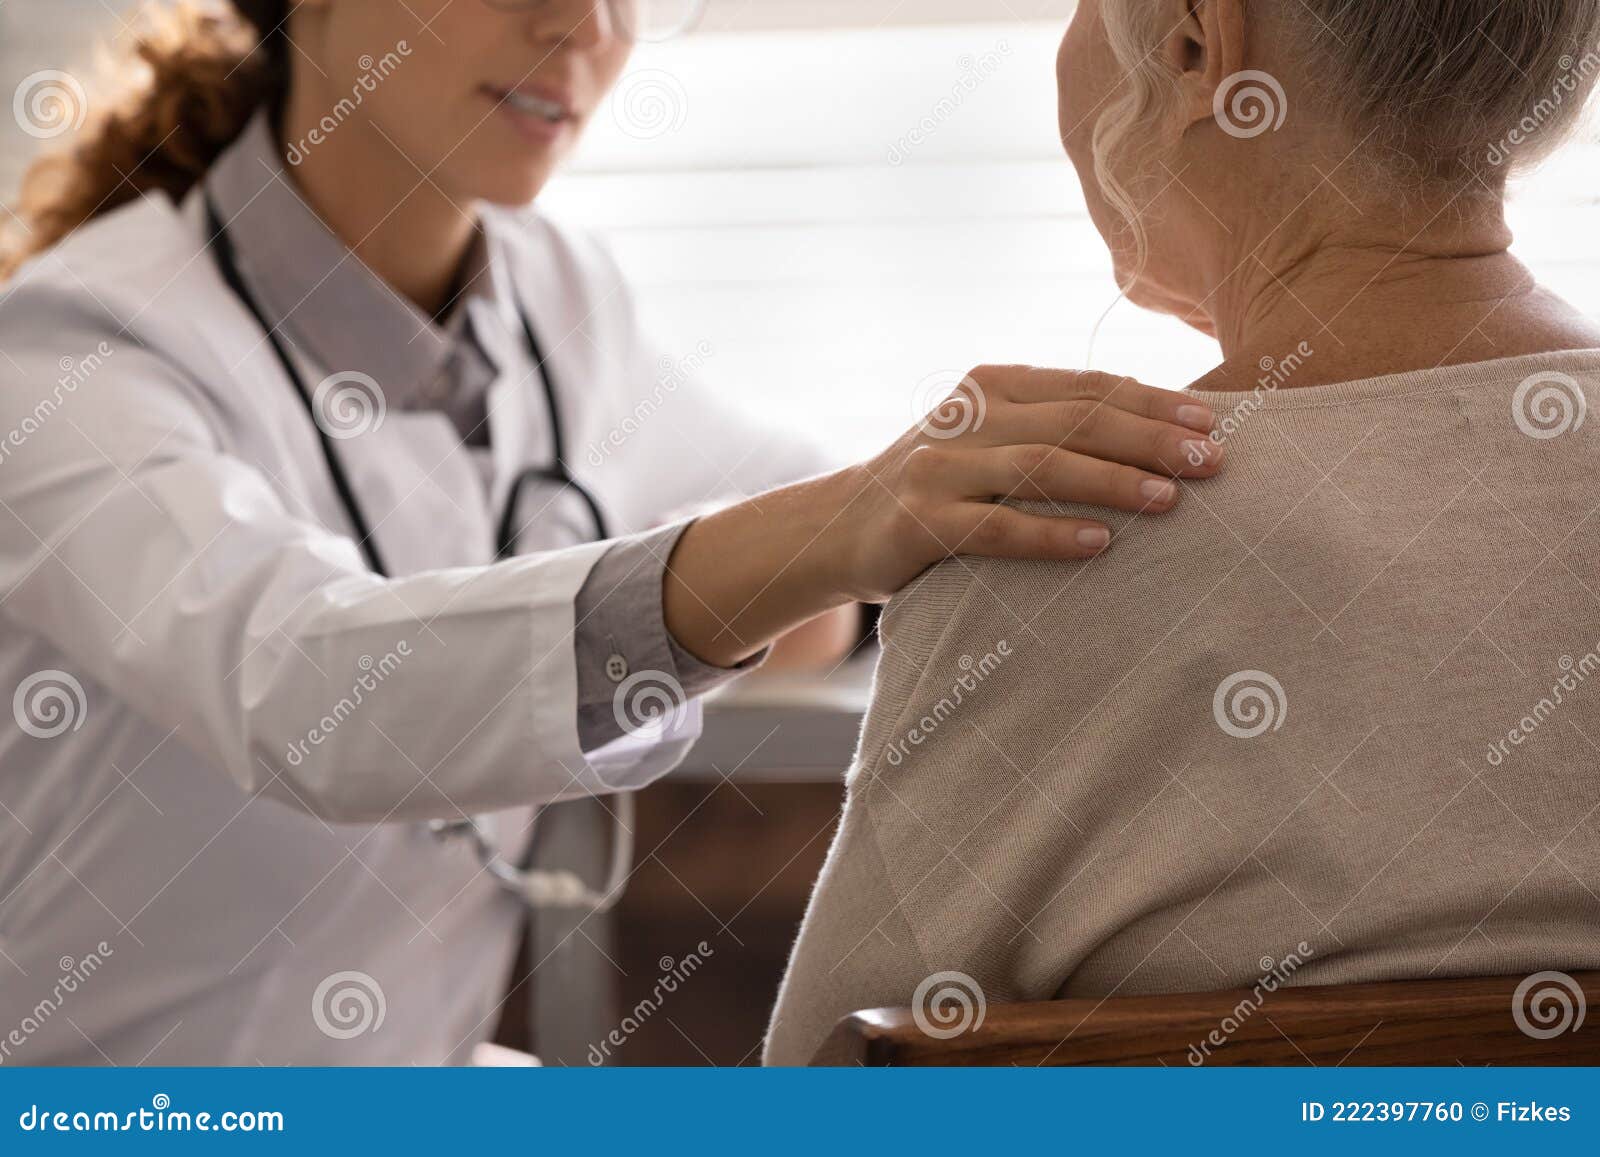 supportive female doctor comfort old woman client